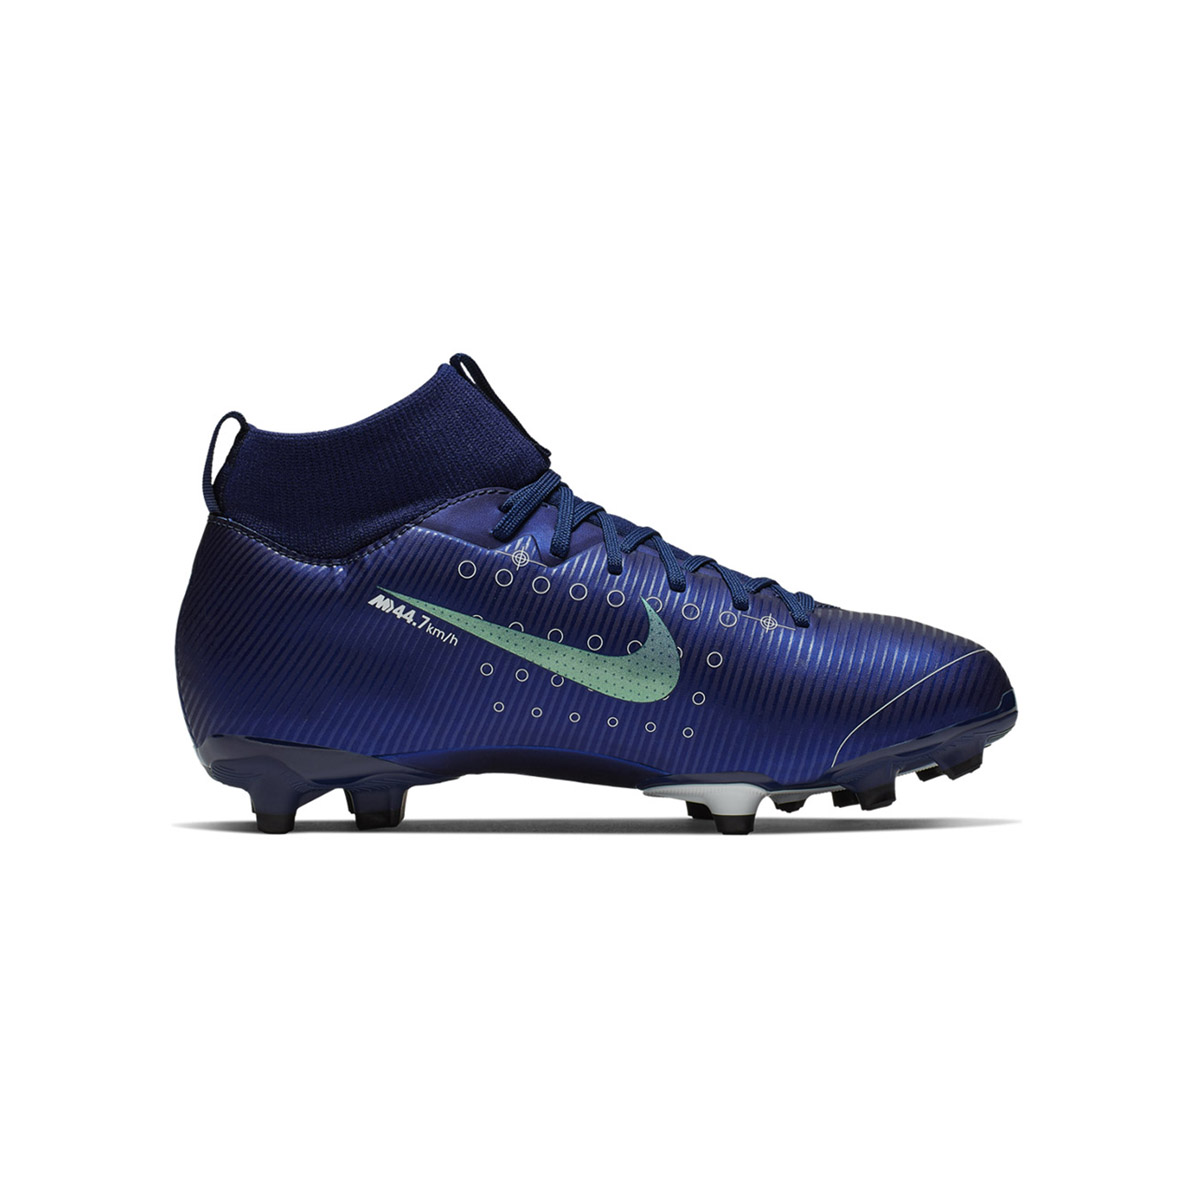 Botines Nike Jr Superfly 7 Academy Mds Fg/Mg,  image number null